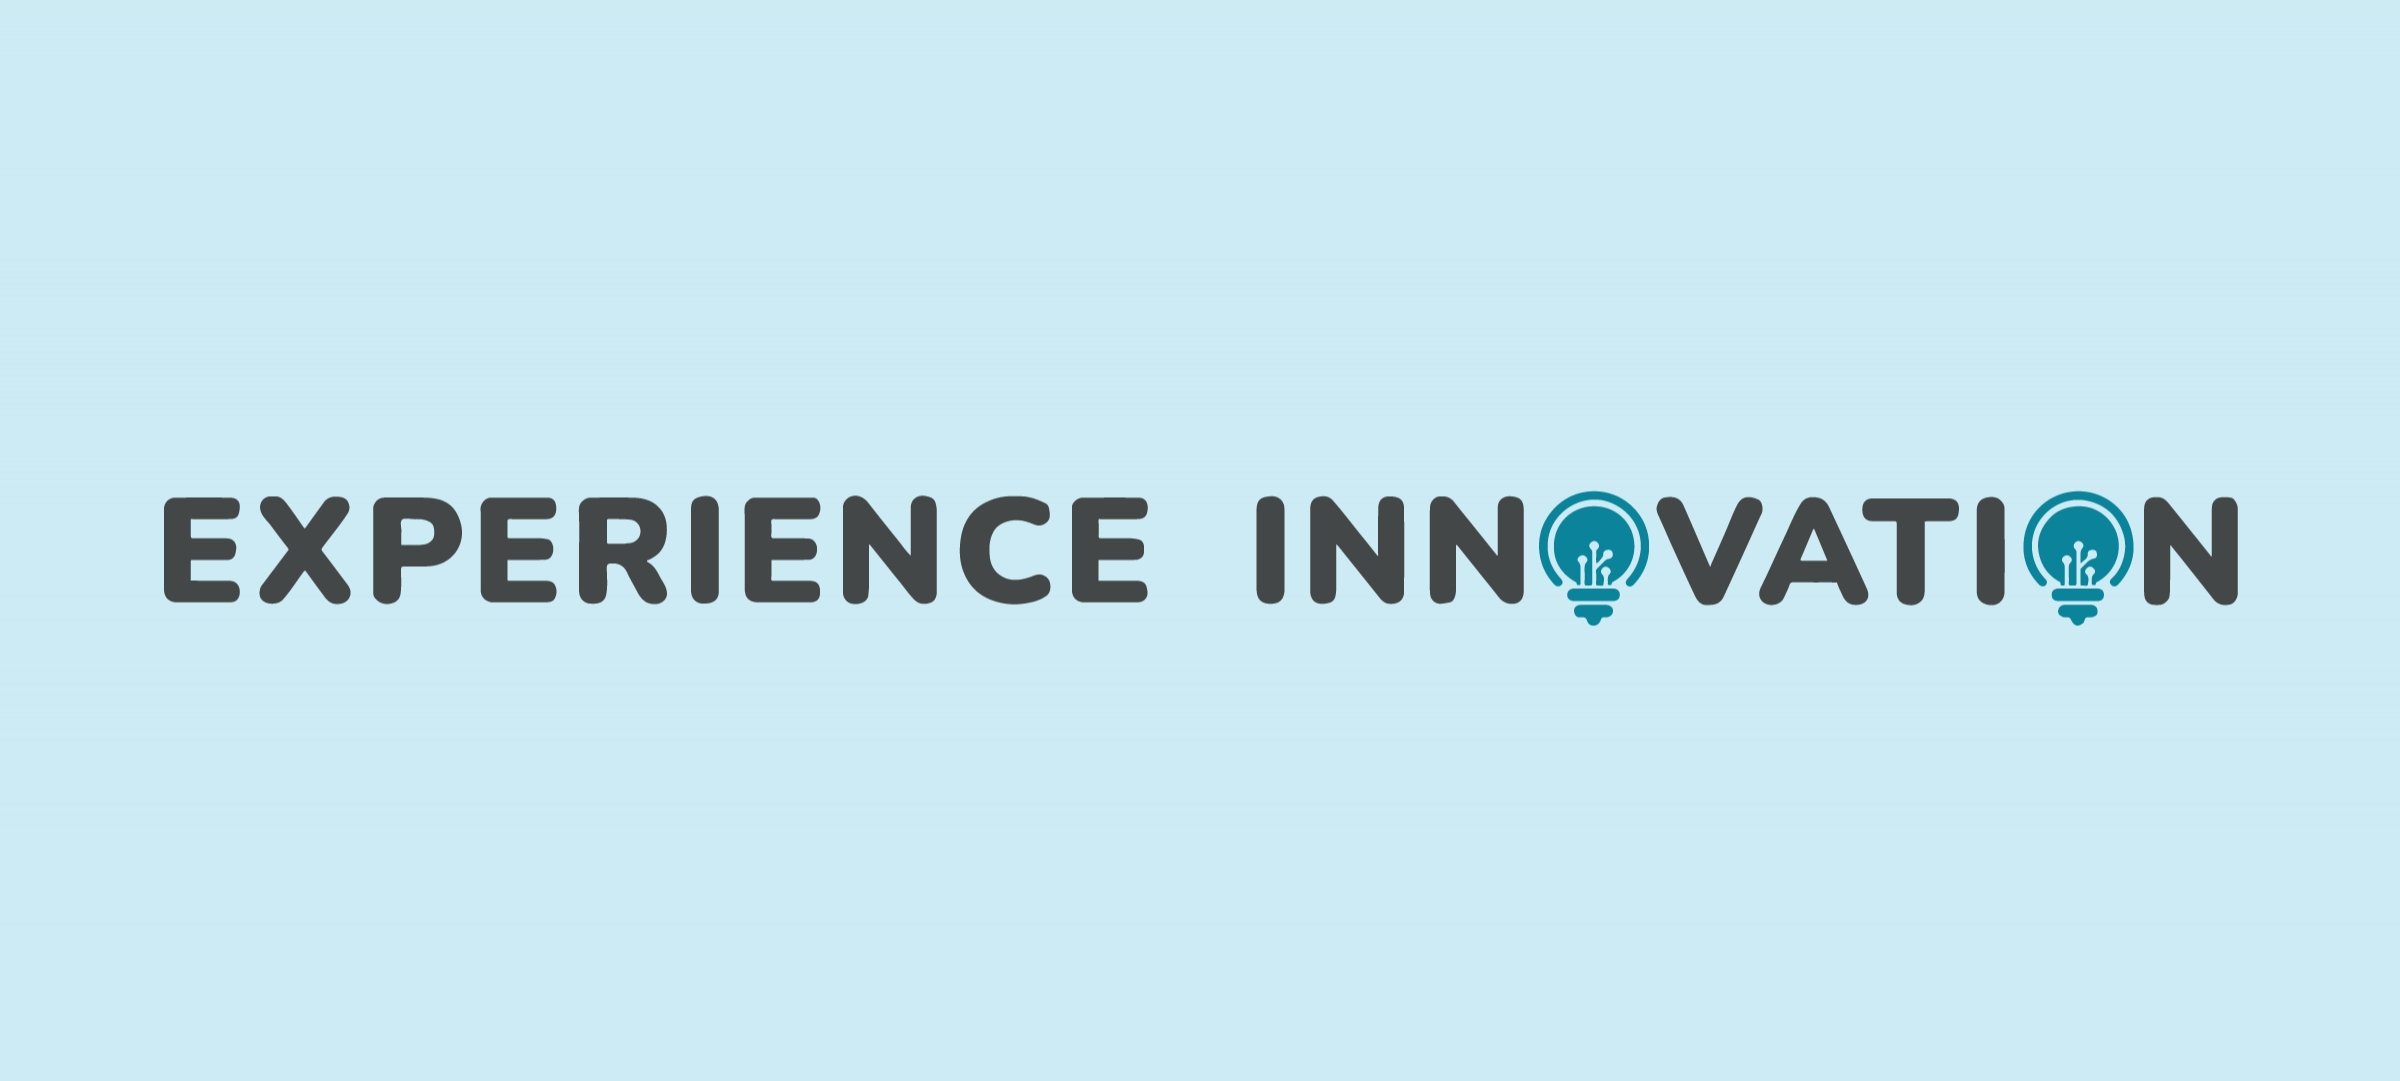 Experience Innovation text banner